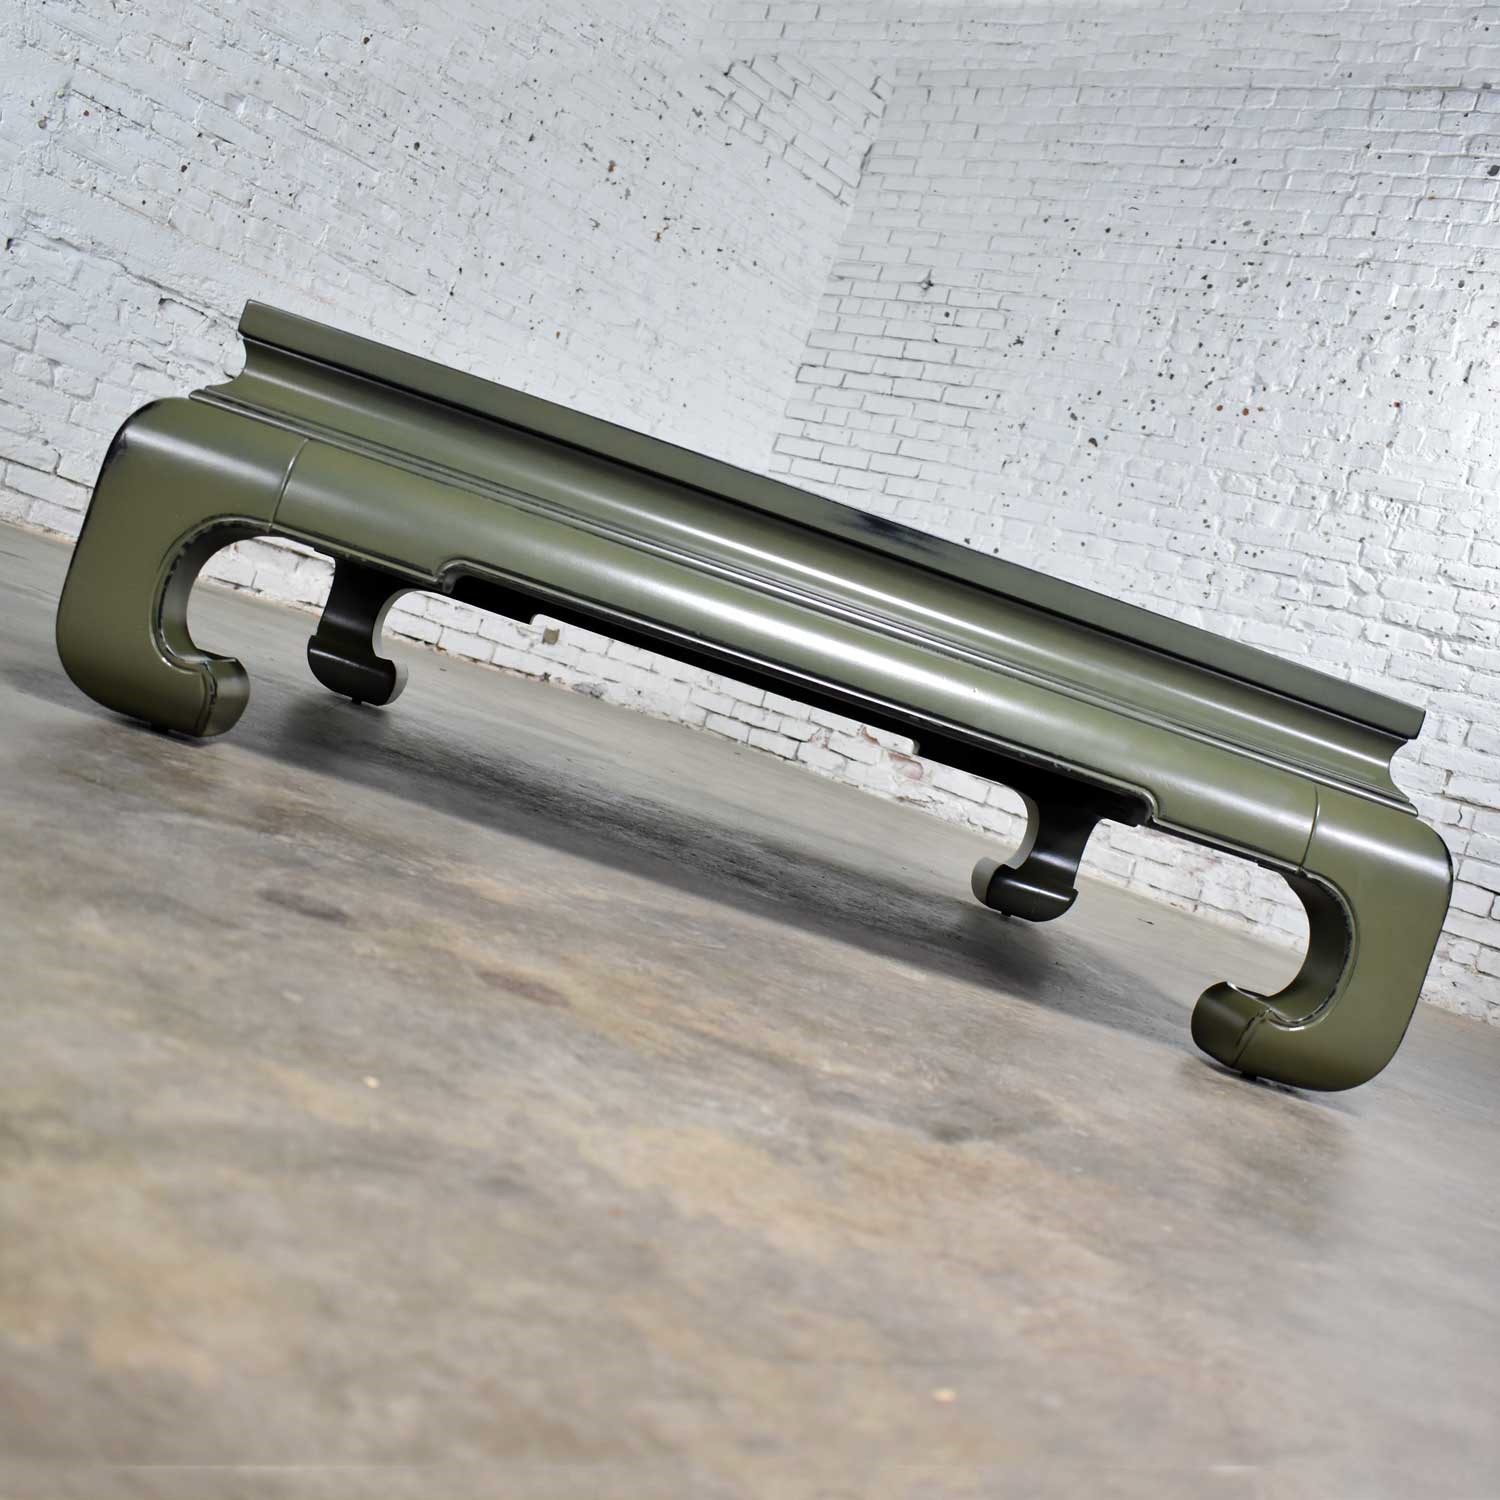 Monumental Square Asian Ming Style Lacquered Coffee Table in Sage Green